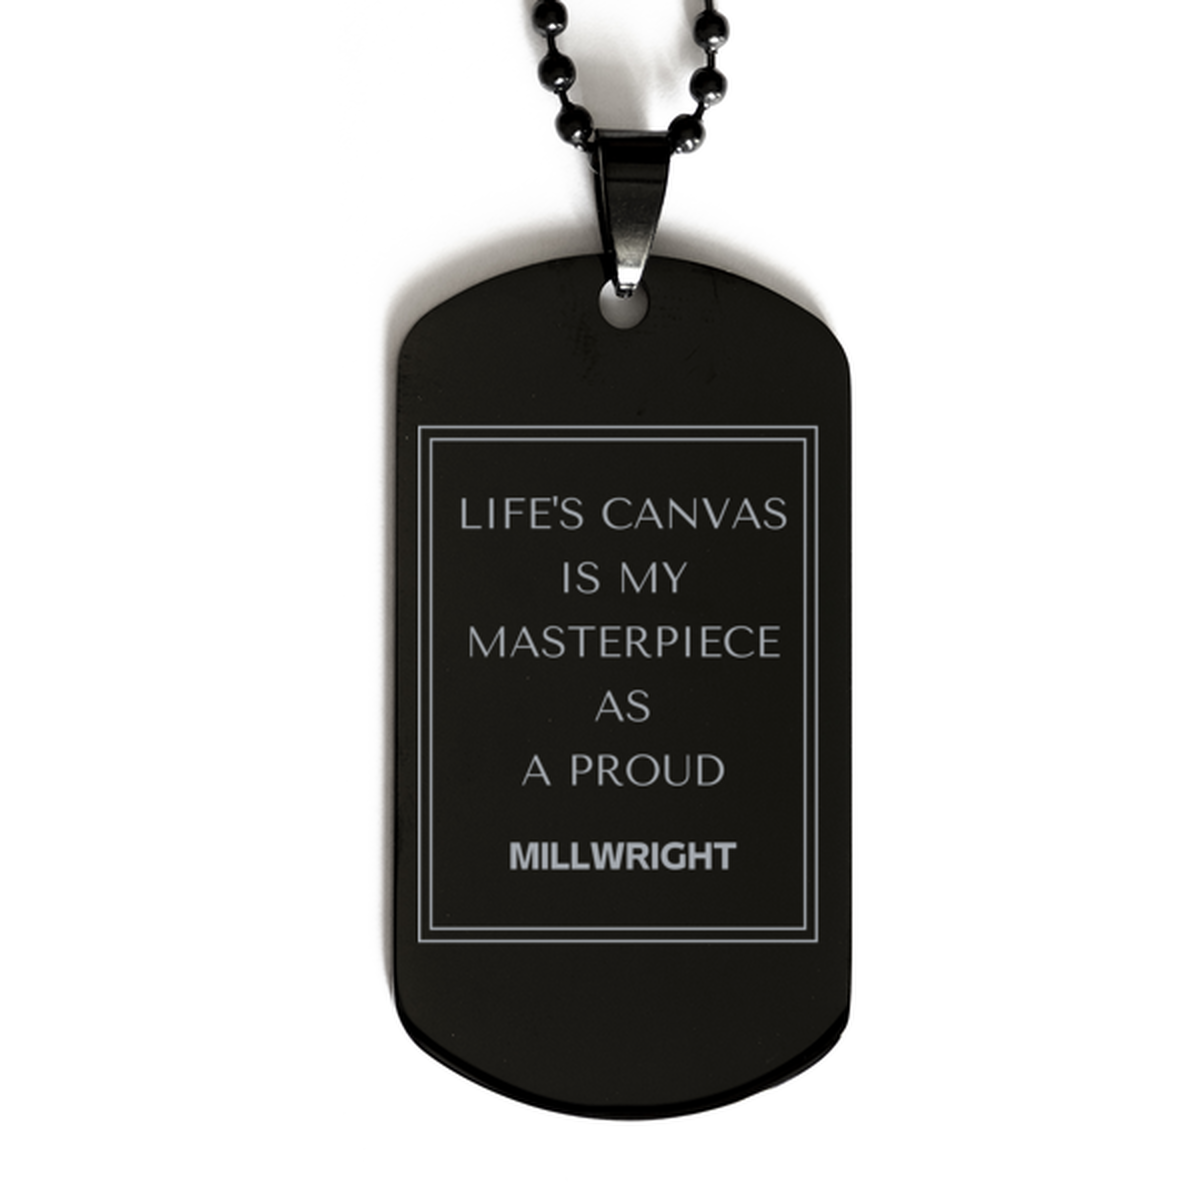 Proud Millwright Gifts, Life's canvas is my masterpiece, Epic Birthday Christmas Unique Black Dog Tag For Millwright, Coworkers, Men, Women, Friends